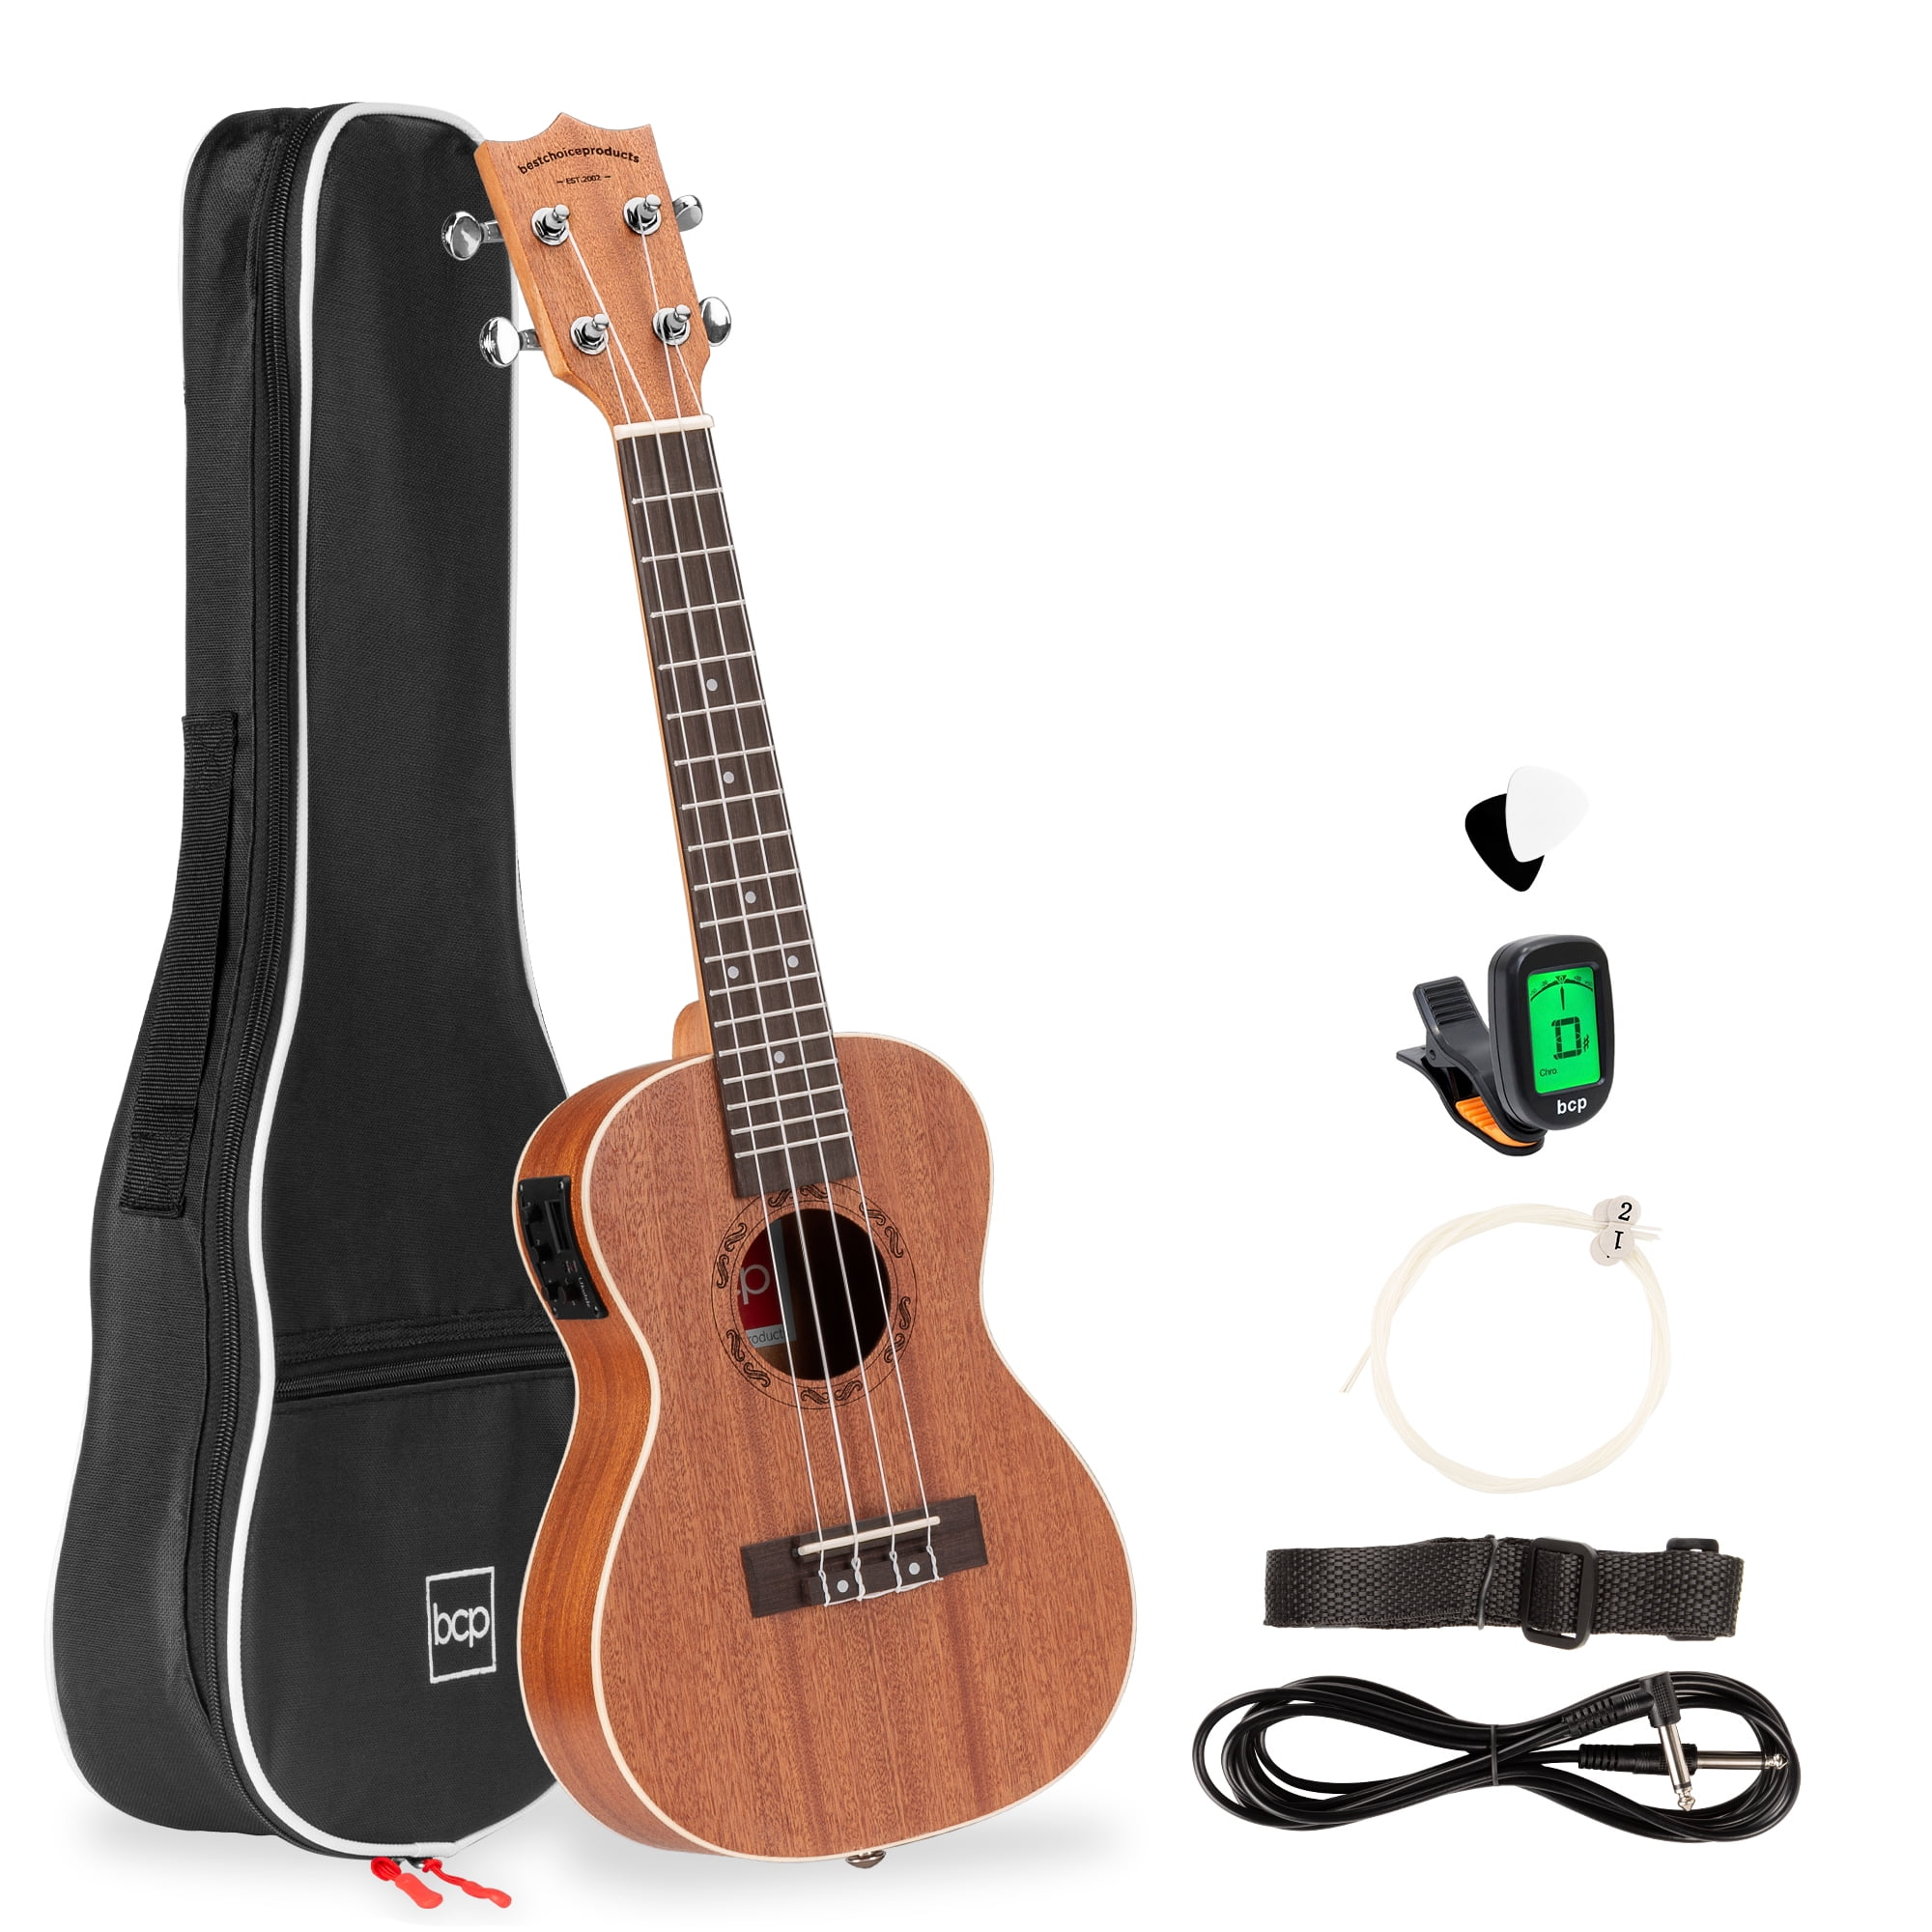 Best Choice Products 23in Acoustic Electric Ukulele Kit w/ Gig Bag, Built-in Tuner, Picks - Walmart.com